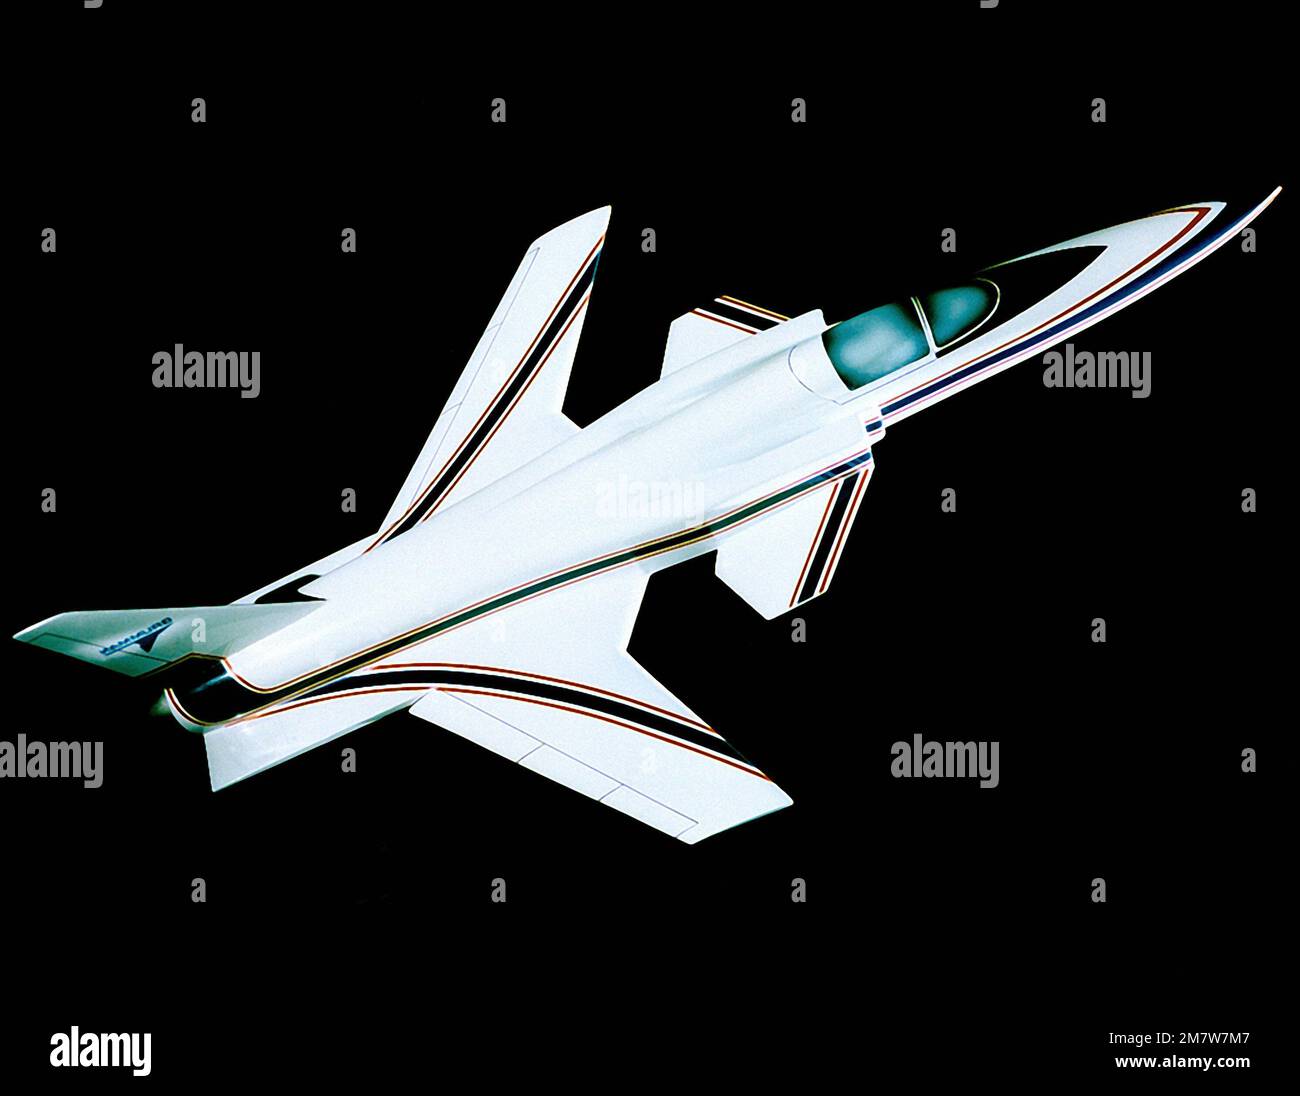 A model of the Gruman X-29A Advanced Technology Demonstrator forward swept wing aircraft. Country: Unknown Stock Photo